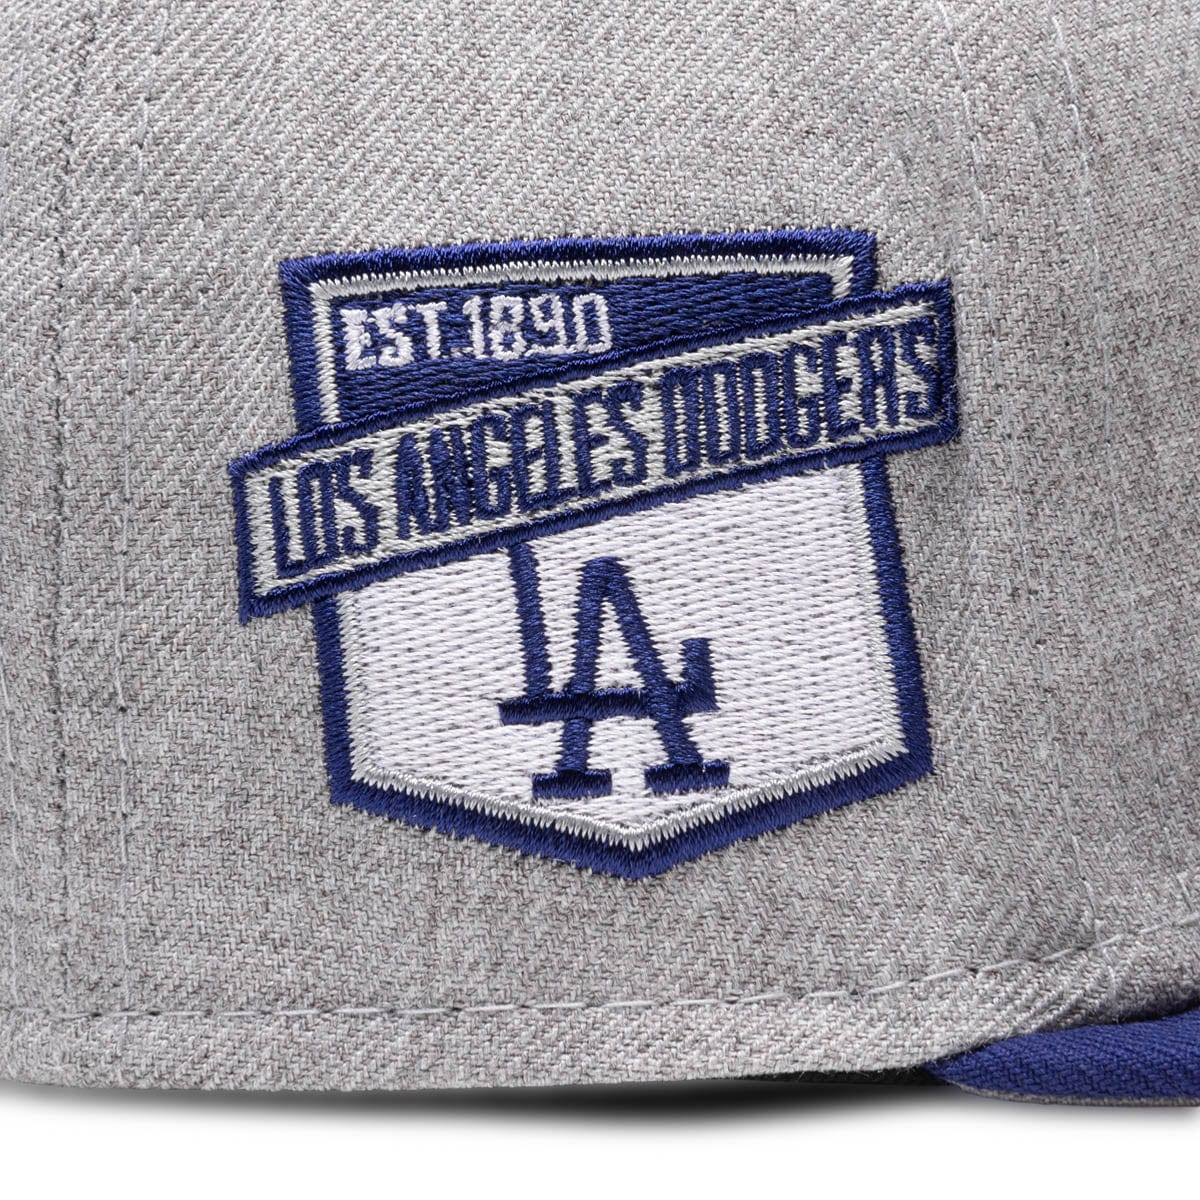 Los Angeles Dodgers Heather Grey Bold Color Backpack FOCO